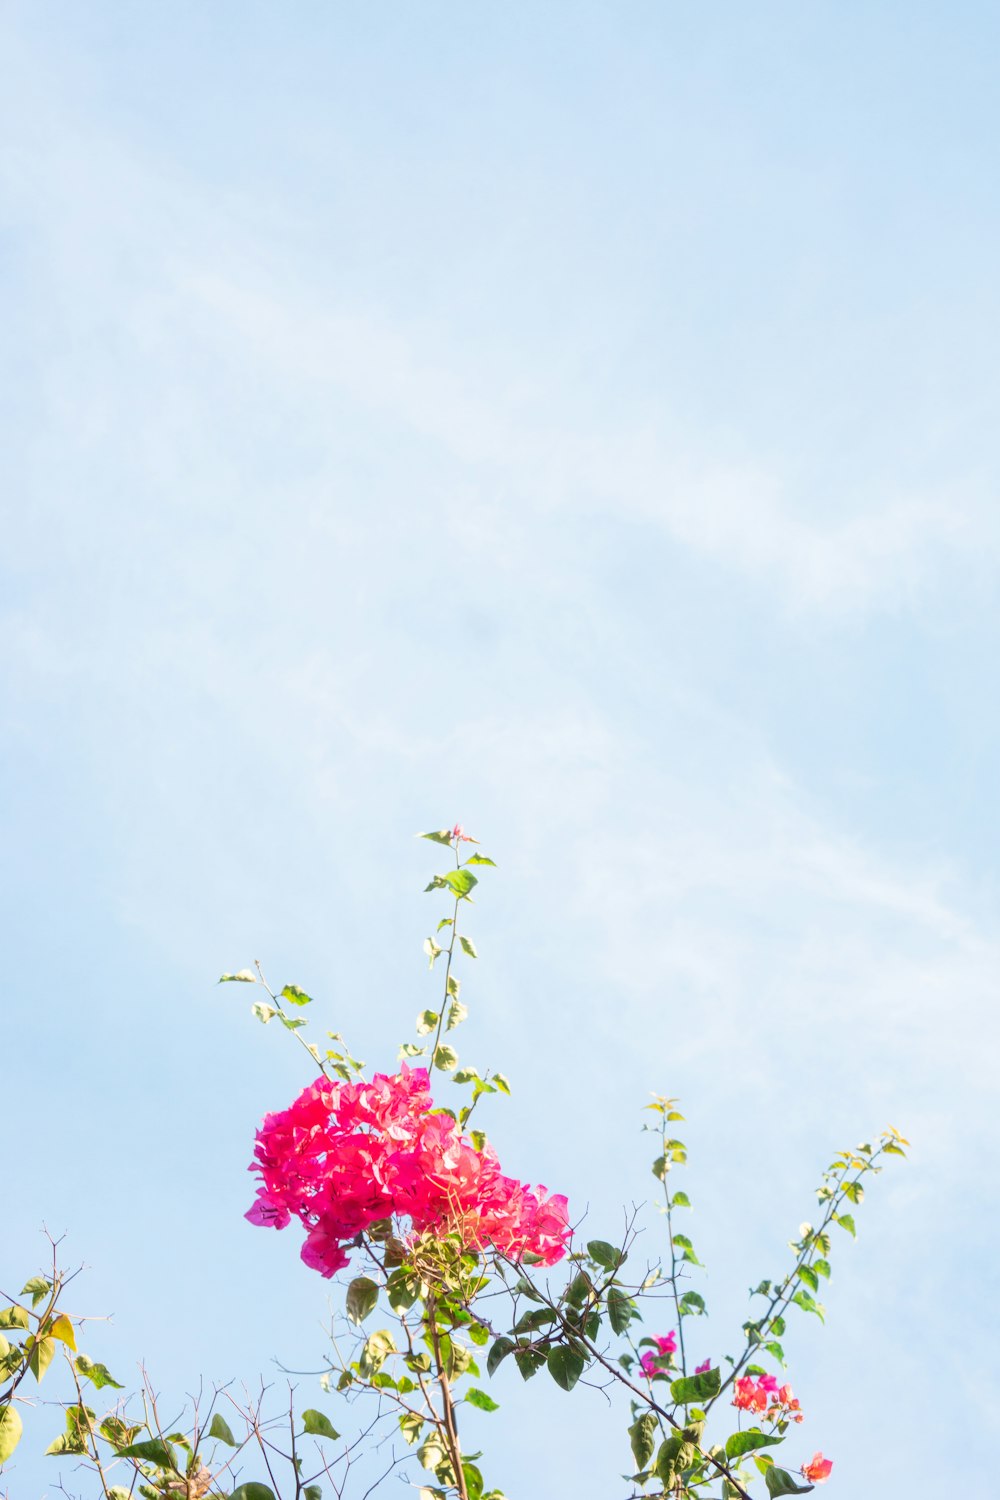 pink flowers with green leaves under white clouds